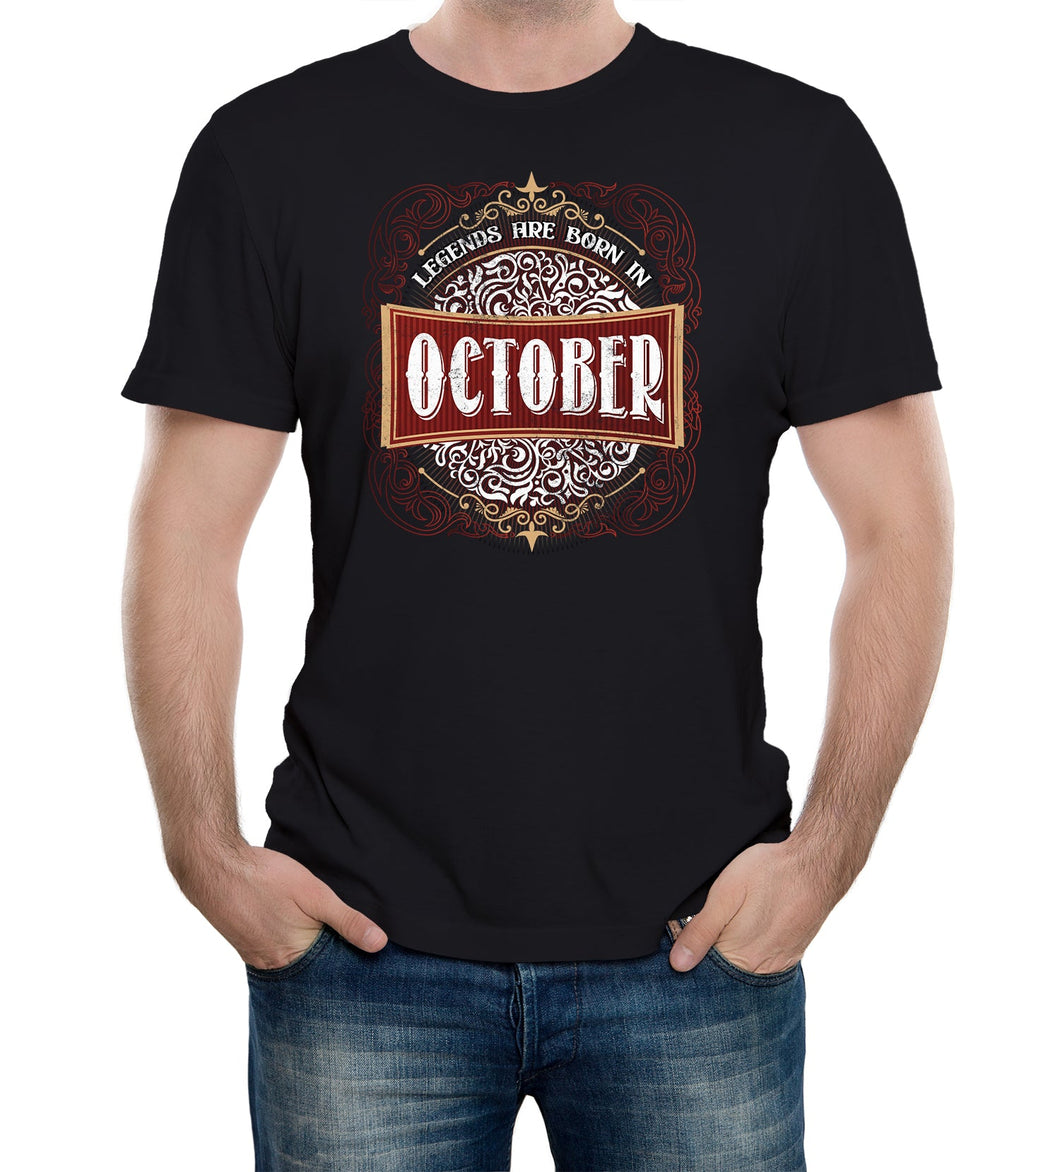 Reality Glitch Only Legends Are Born in October Birthday Mens T-Shirt